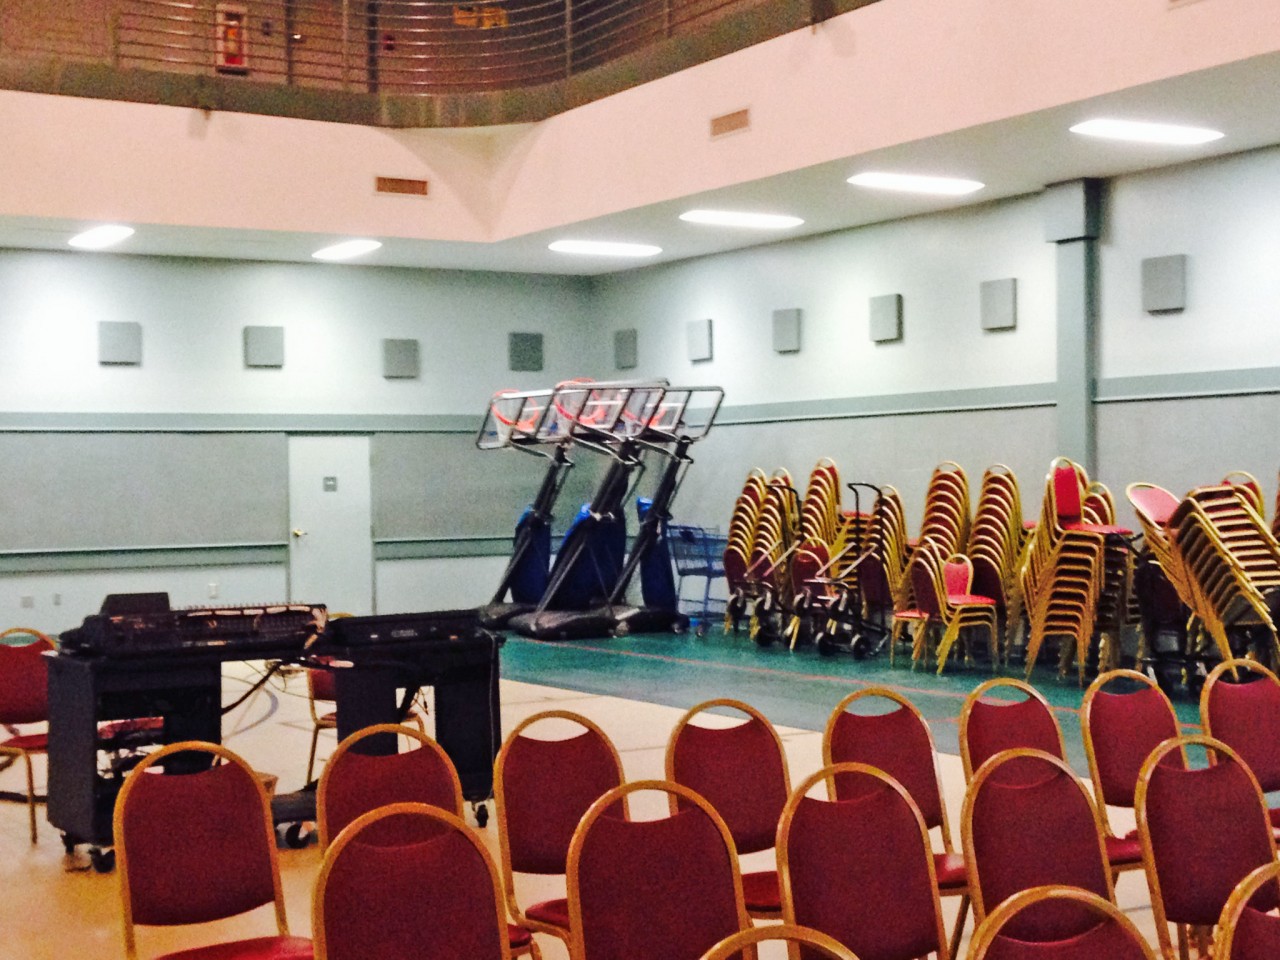 Rows of chair are set up to create a church sanctuary inside a gym. Additional chairs and basketball hoops are set out of the way against the wall.